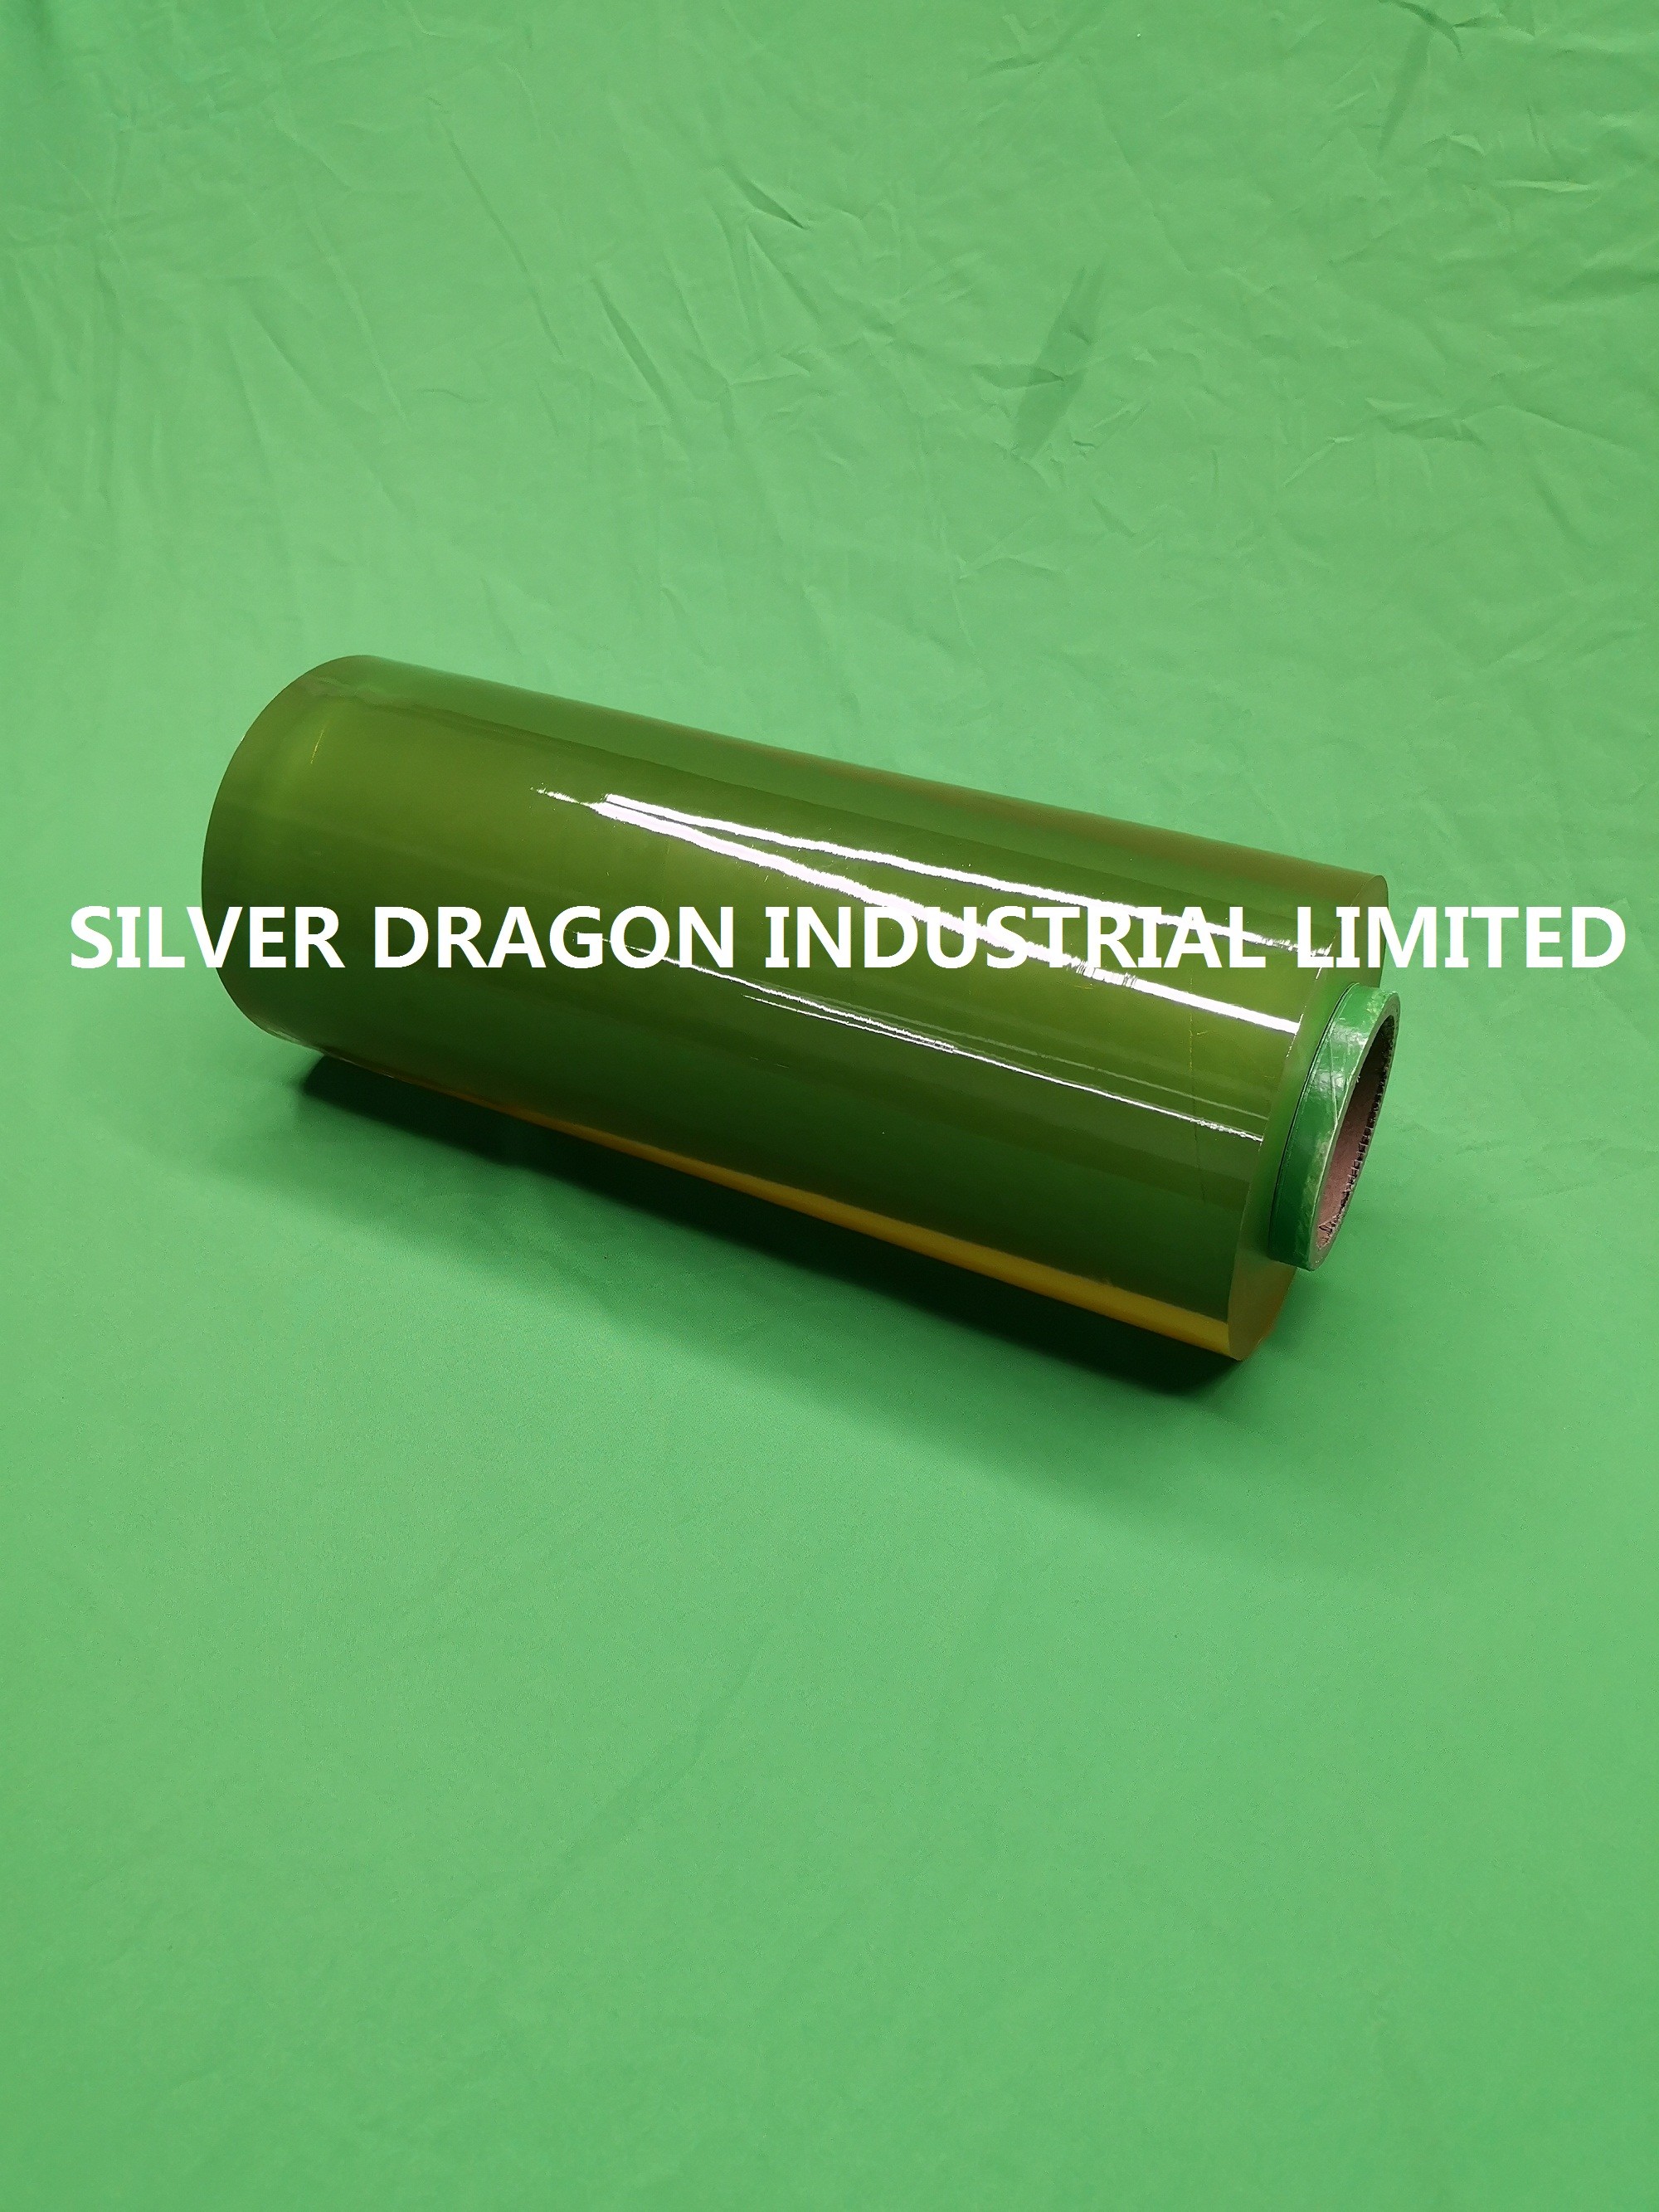 Automatic wrapping machine use PVC Cling Film with green core, Size 12microns x 400mm x 1100m)